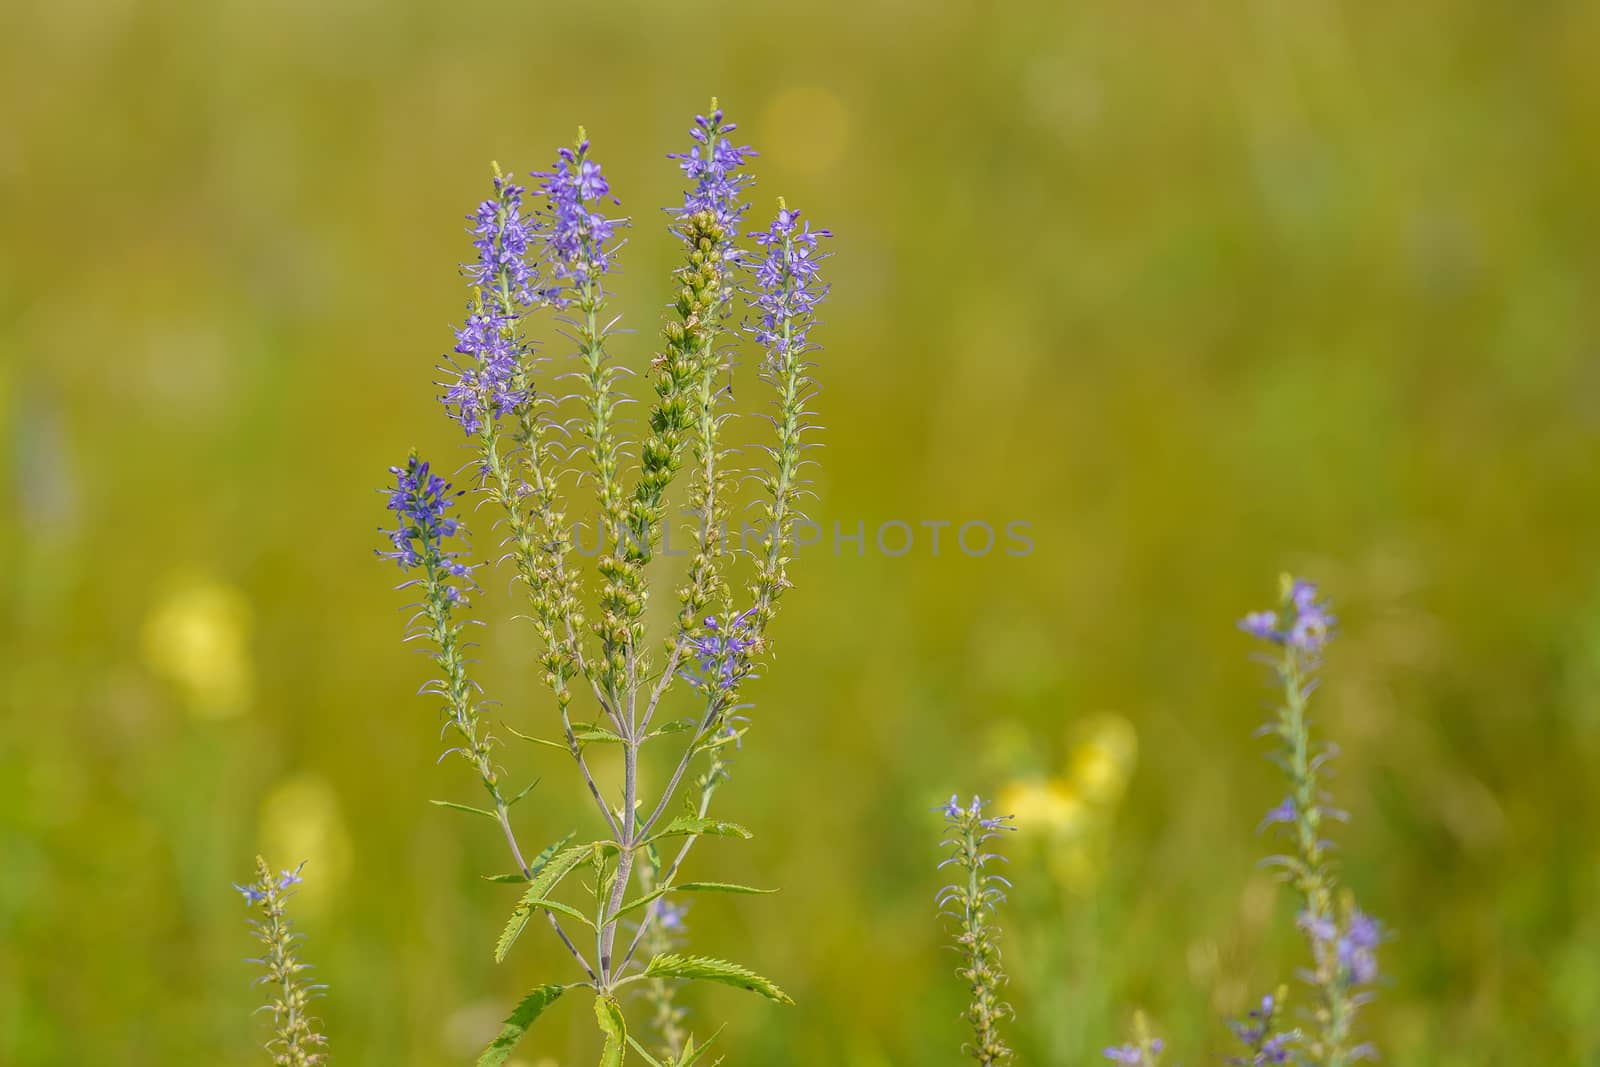 Veronica longifolia, grassy plant with a high stem and blue flowers in the meadow